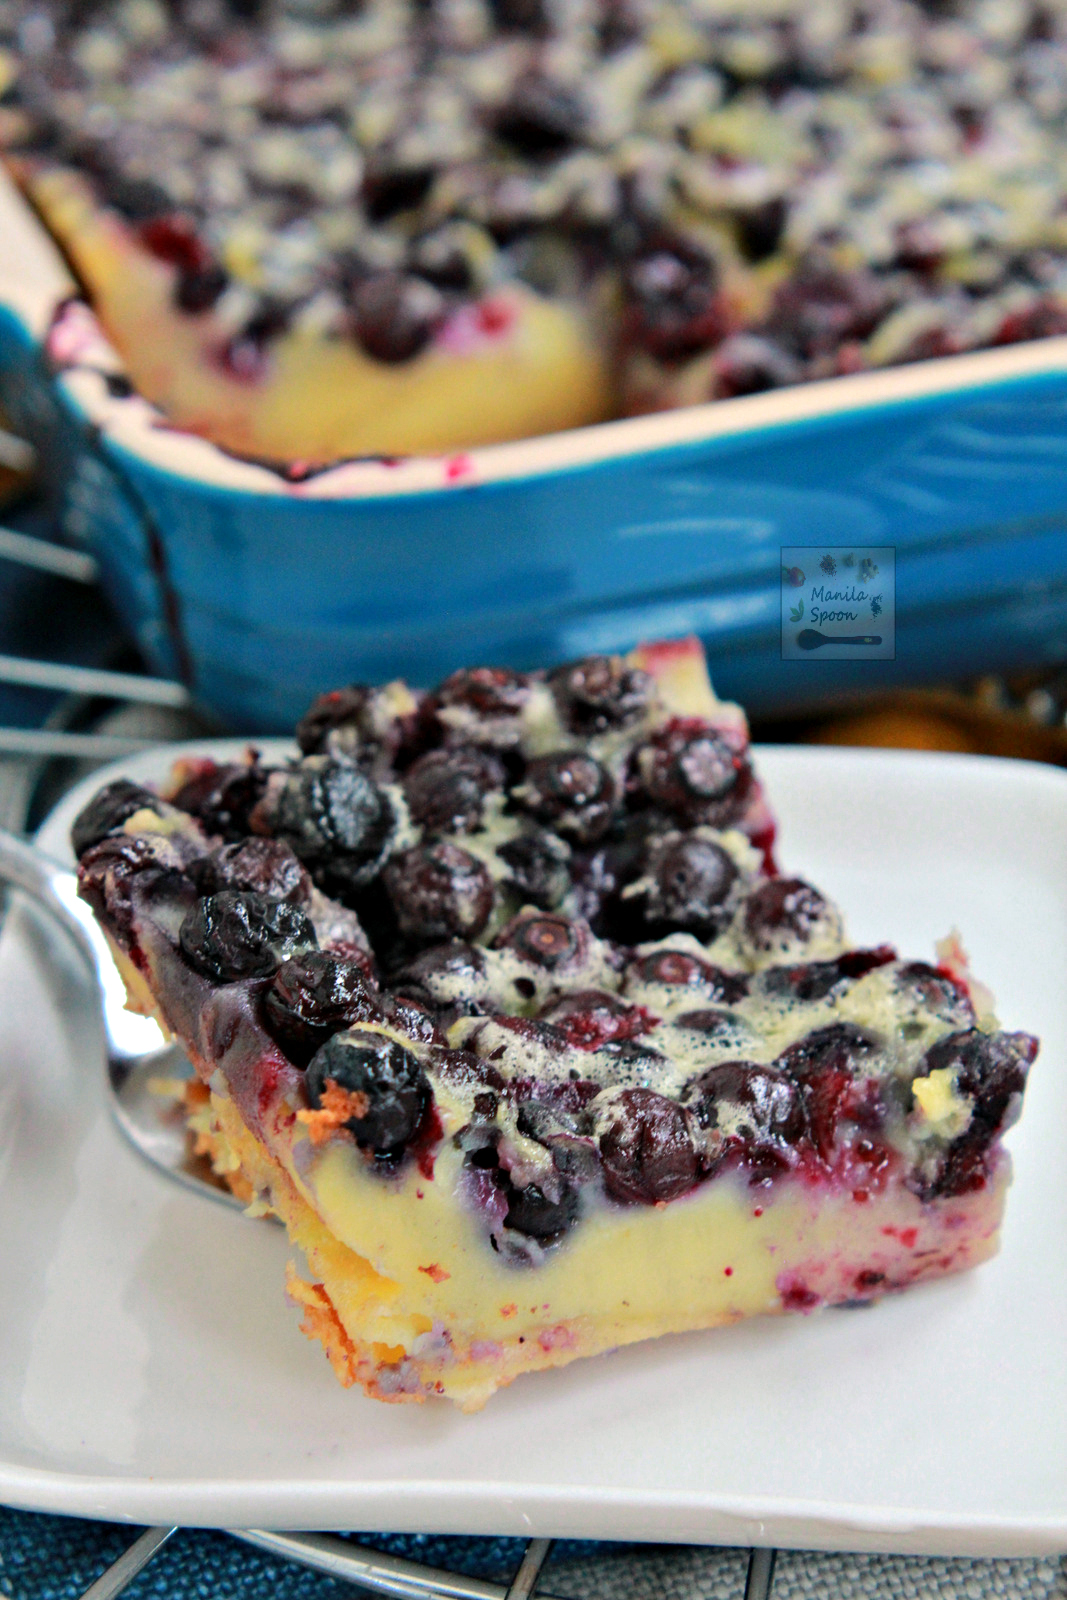 So easy -- simply dump the blueberries in the pan, cover in vanilla custard or flan batter then bake! This French berry dessert - Blueberry Clafoutis is the perfect vehicle for your favorite summer fruit! 